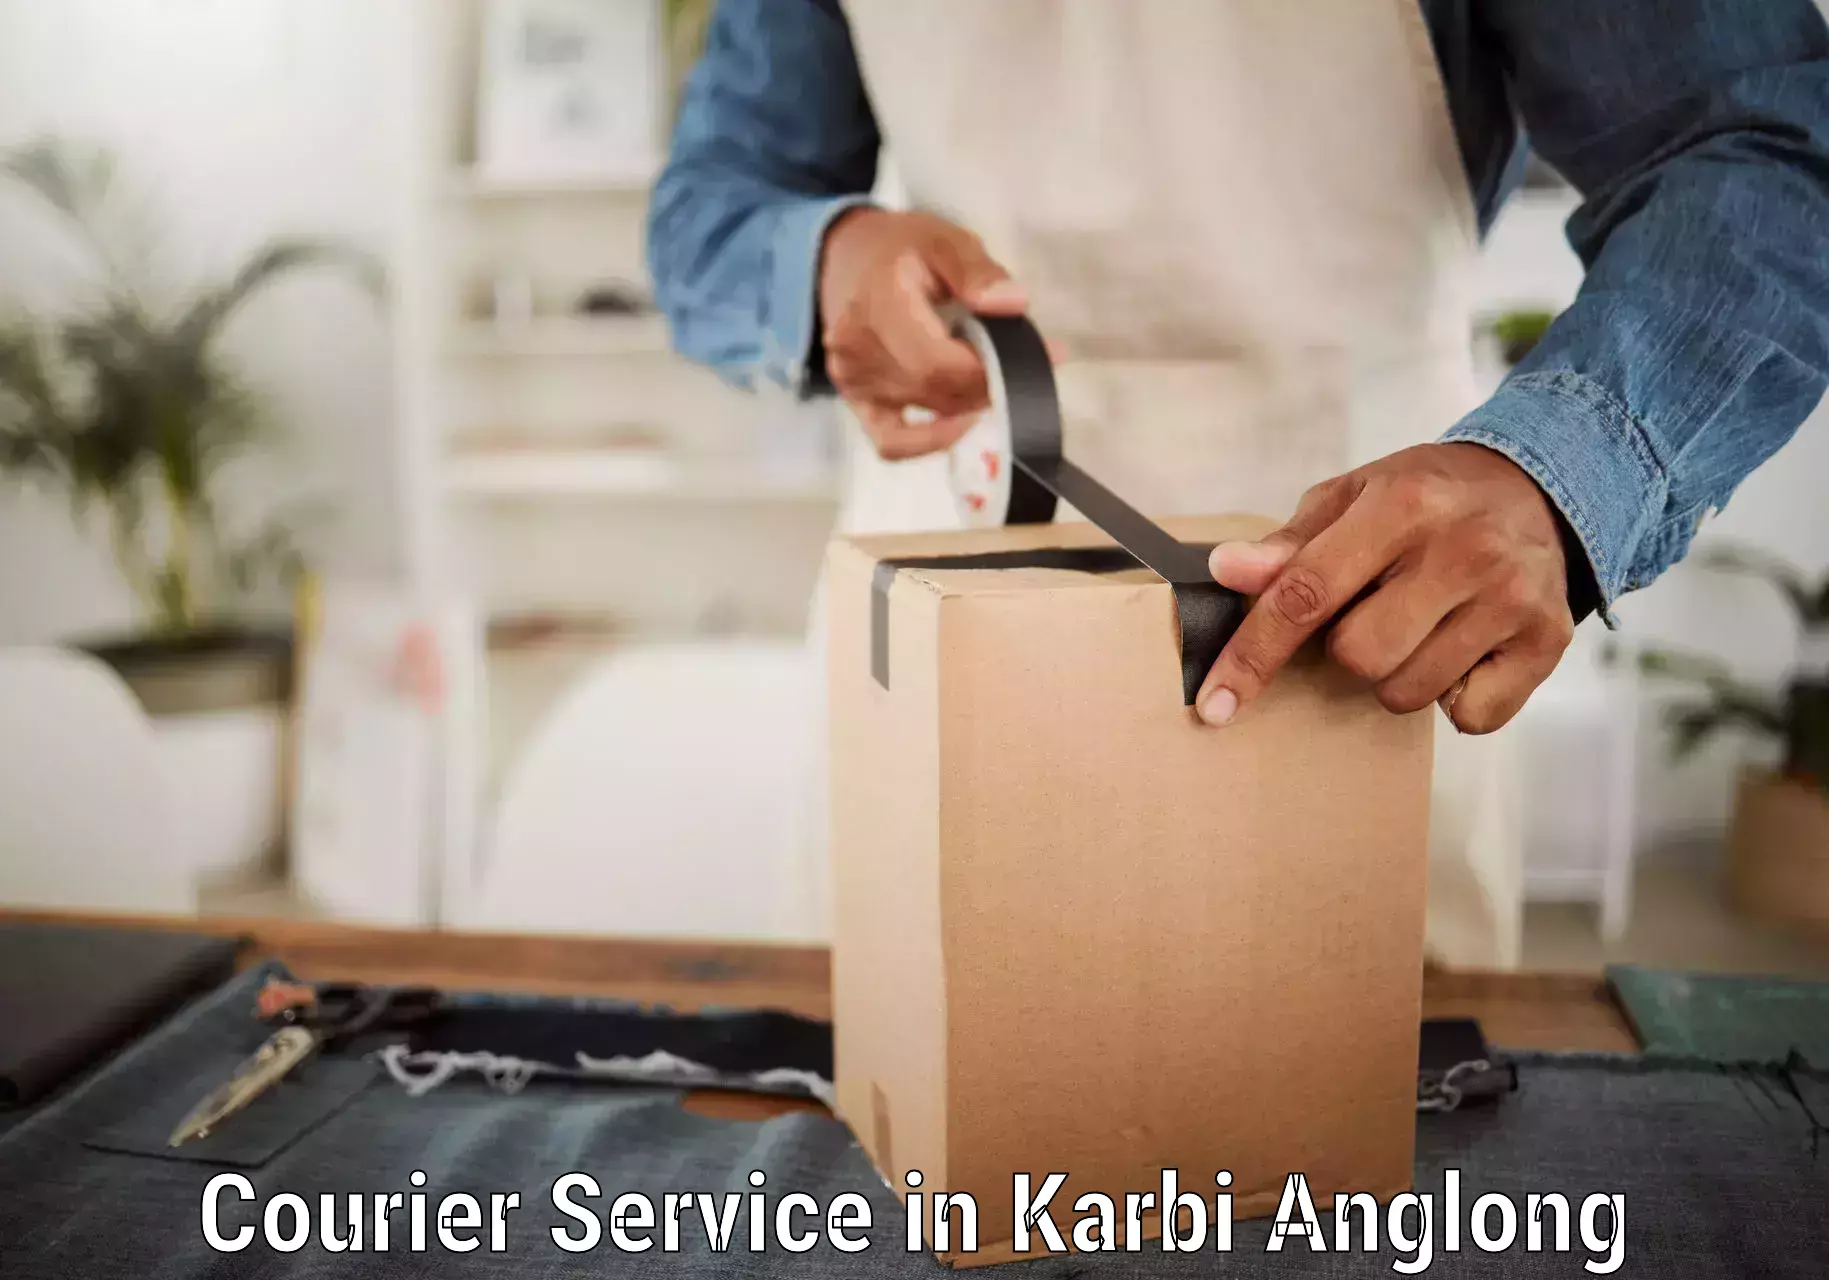 Same-day delivery solutions in Karbi Anglong